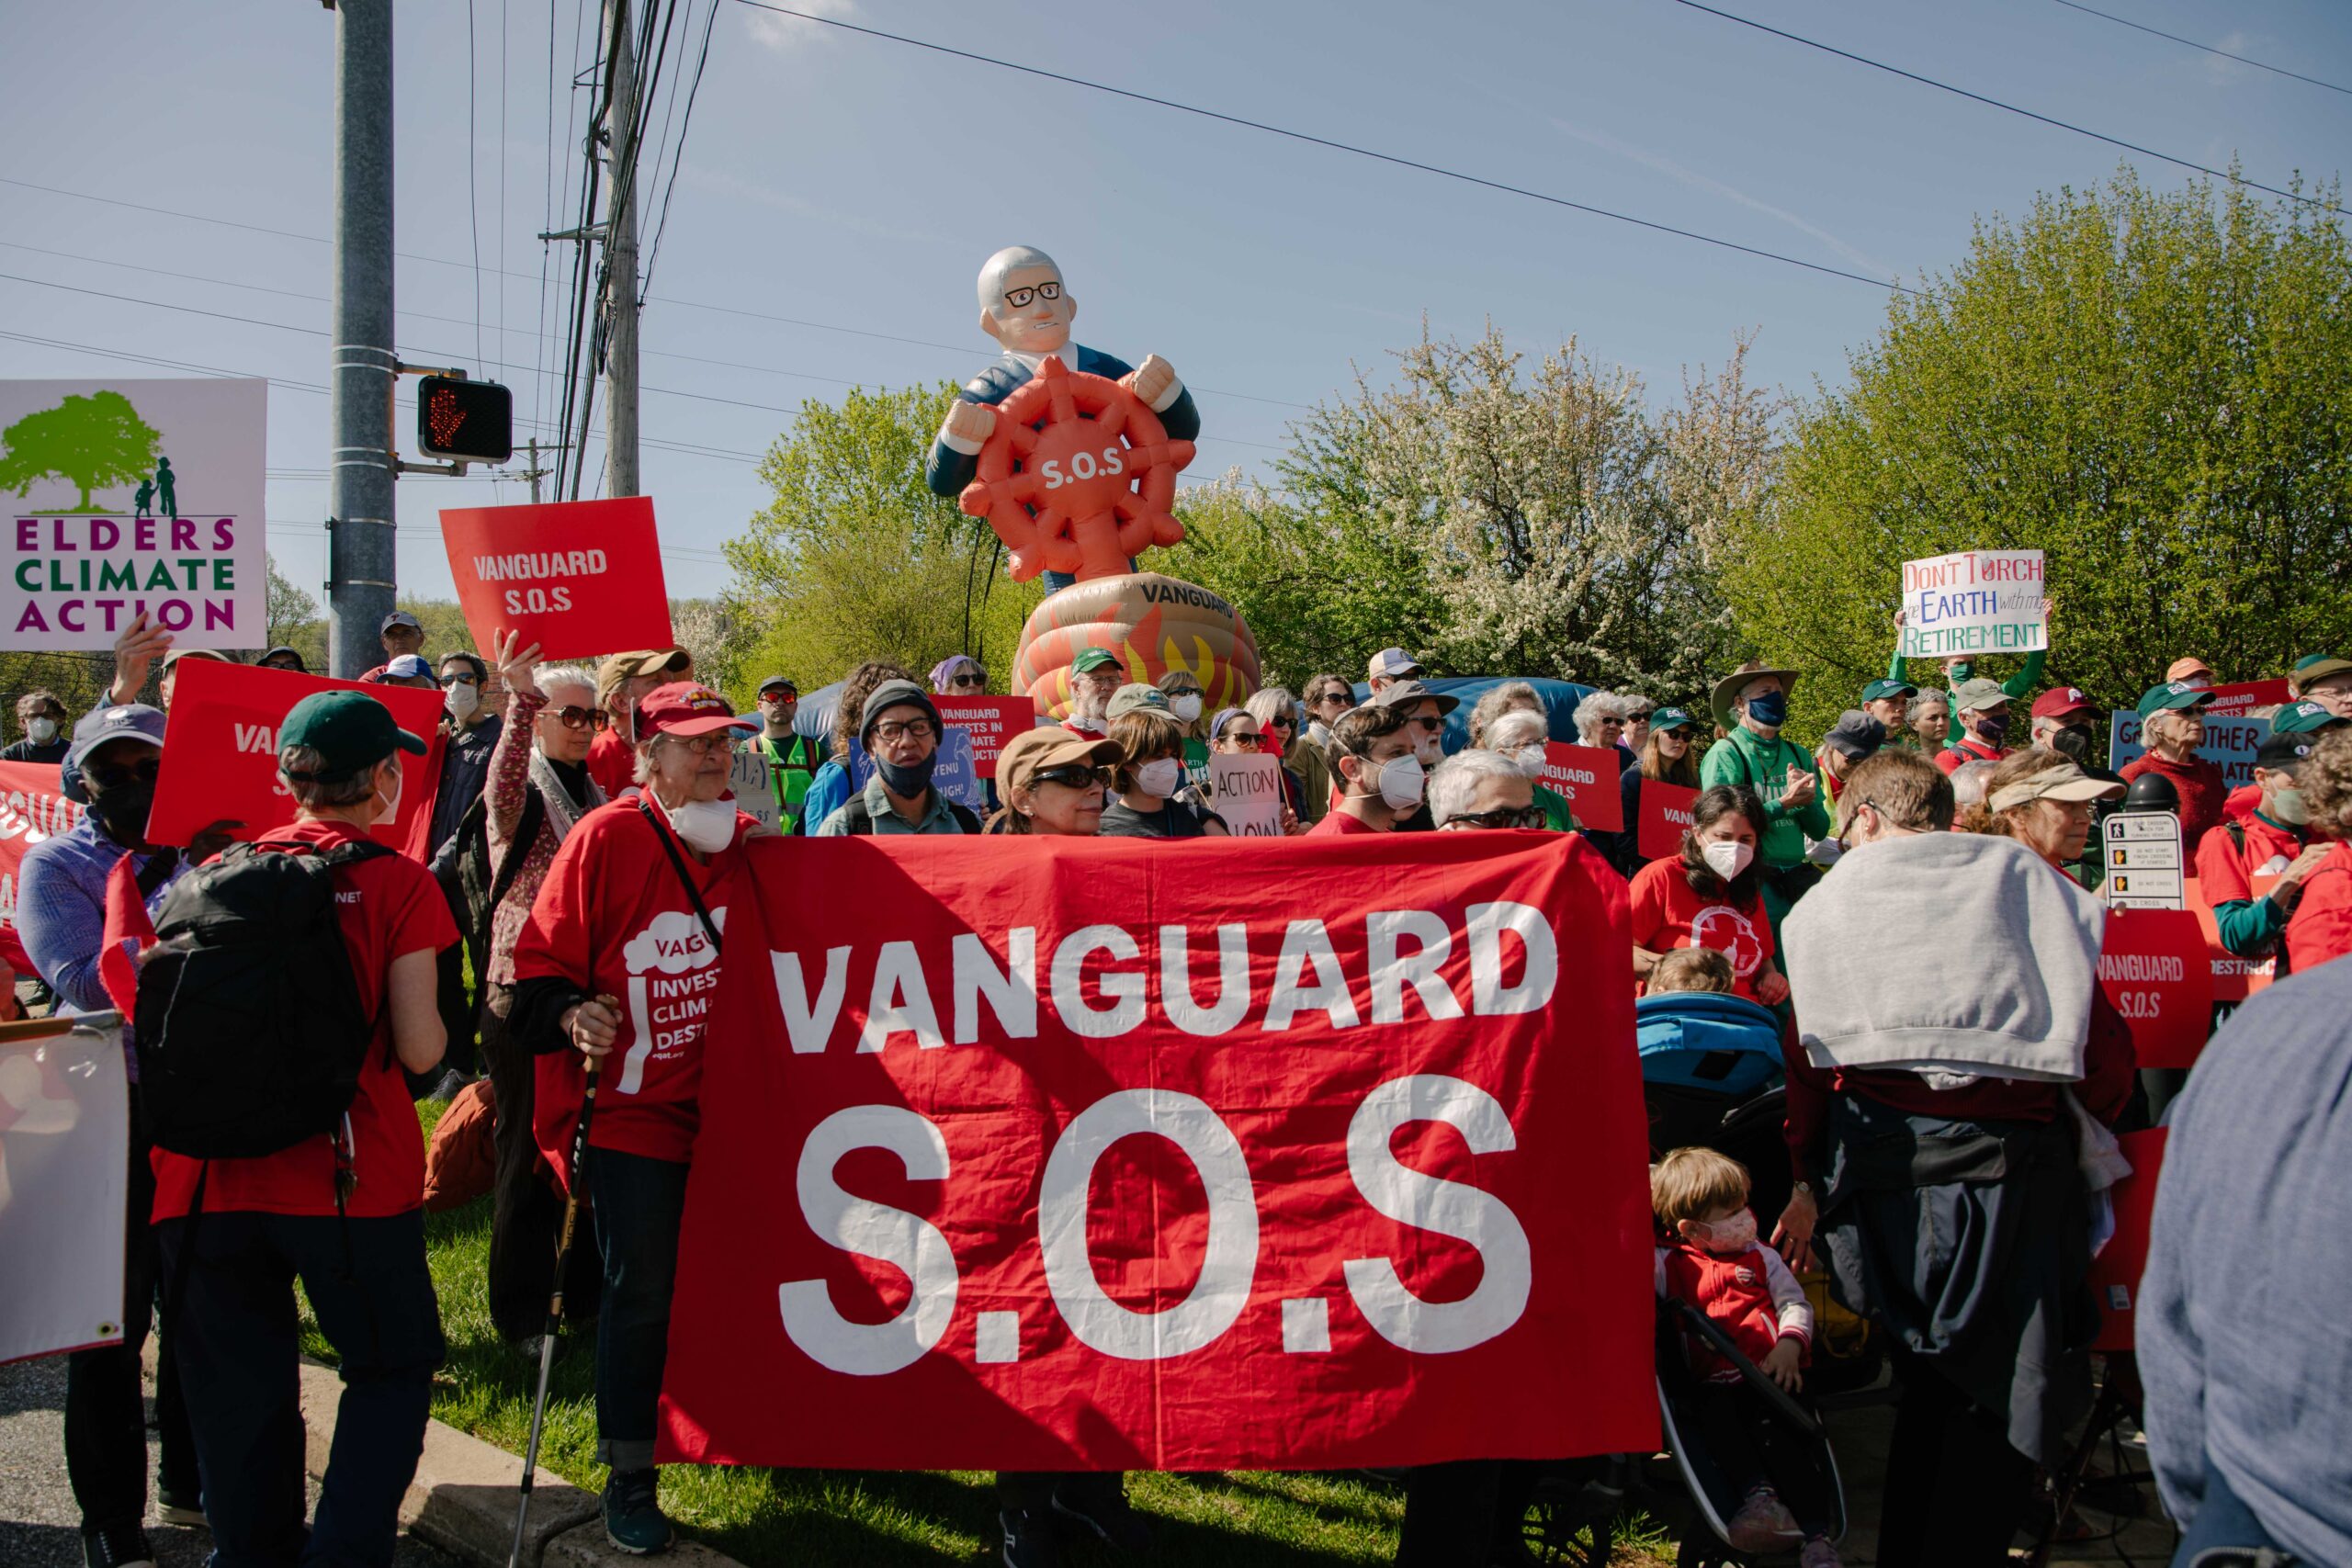 A group of 50+ protestors gather carrying signs. In the front of the crowd protestors hold a red banner with white text reading "Vanguard S.O.S." In the background is an inflatable of Vanguard CEO Tim Buckley in a ship that's wreathed in painted flames, clutching a red steering wheel with S.O.S. on the front.